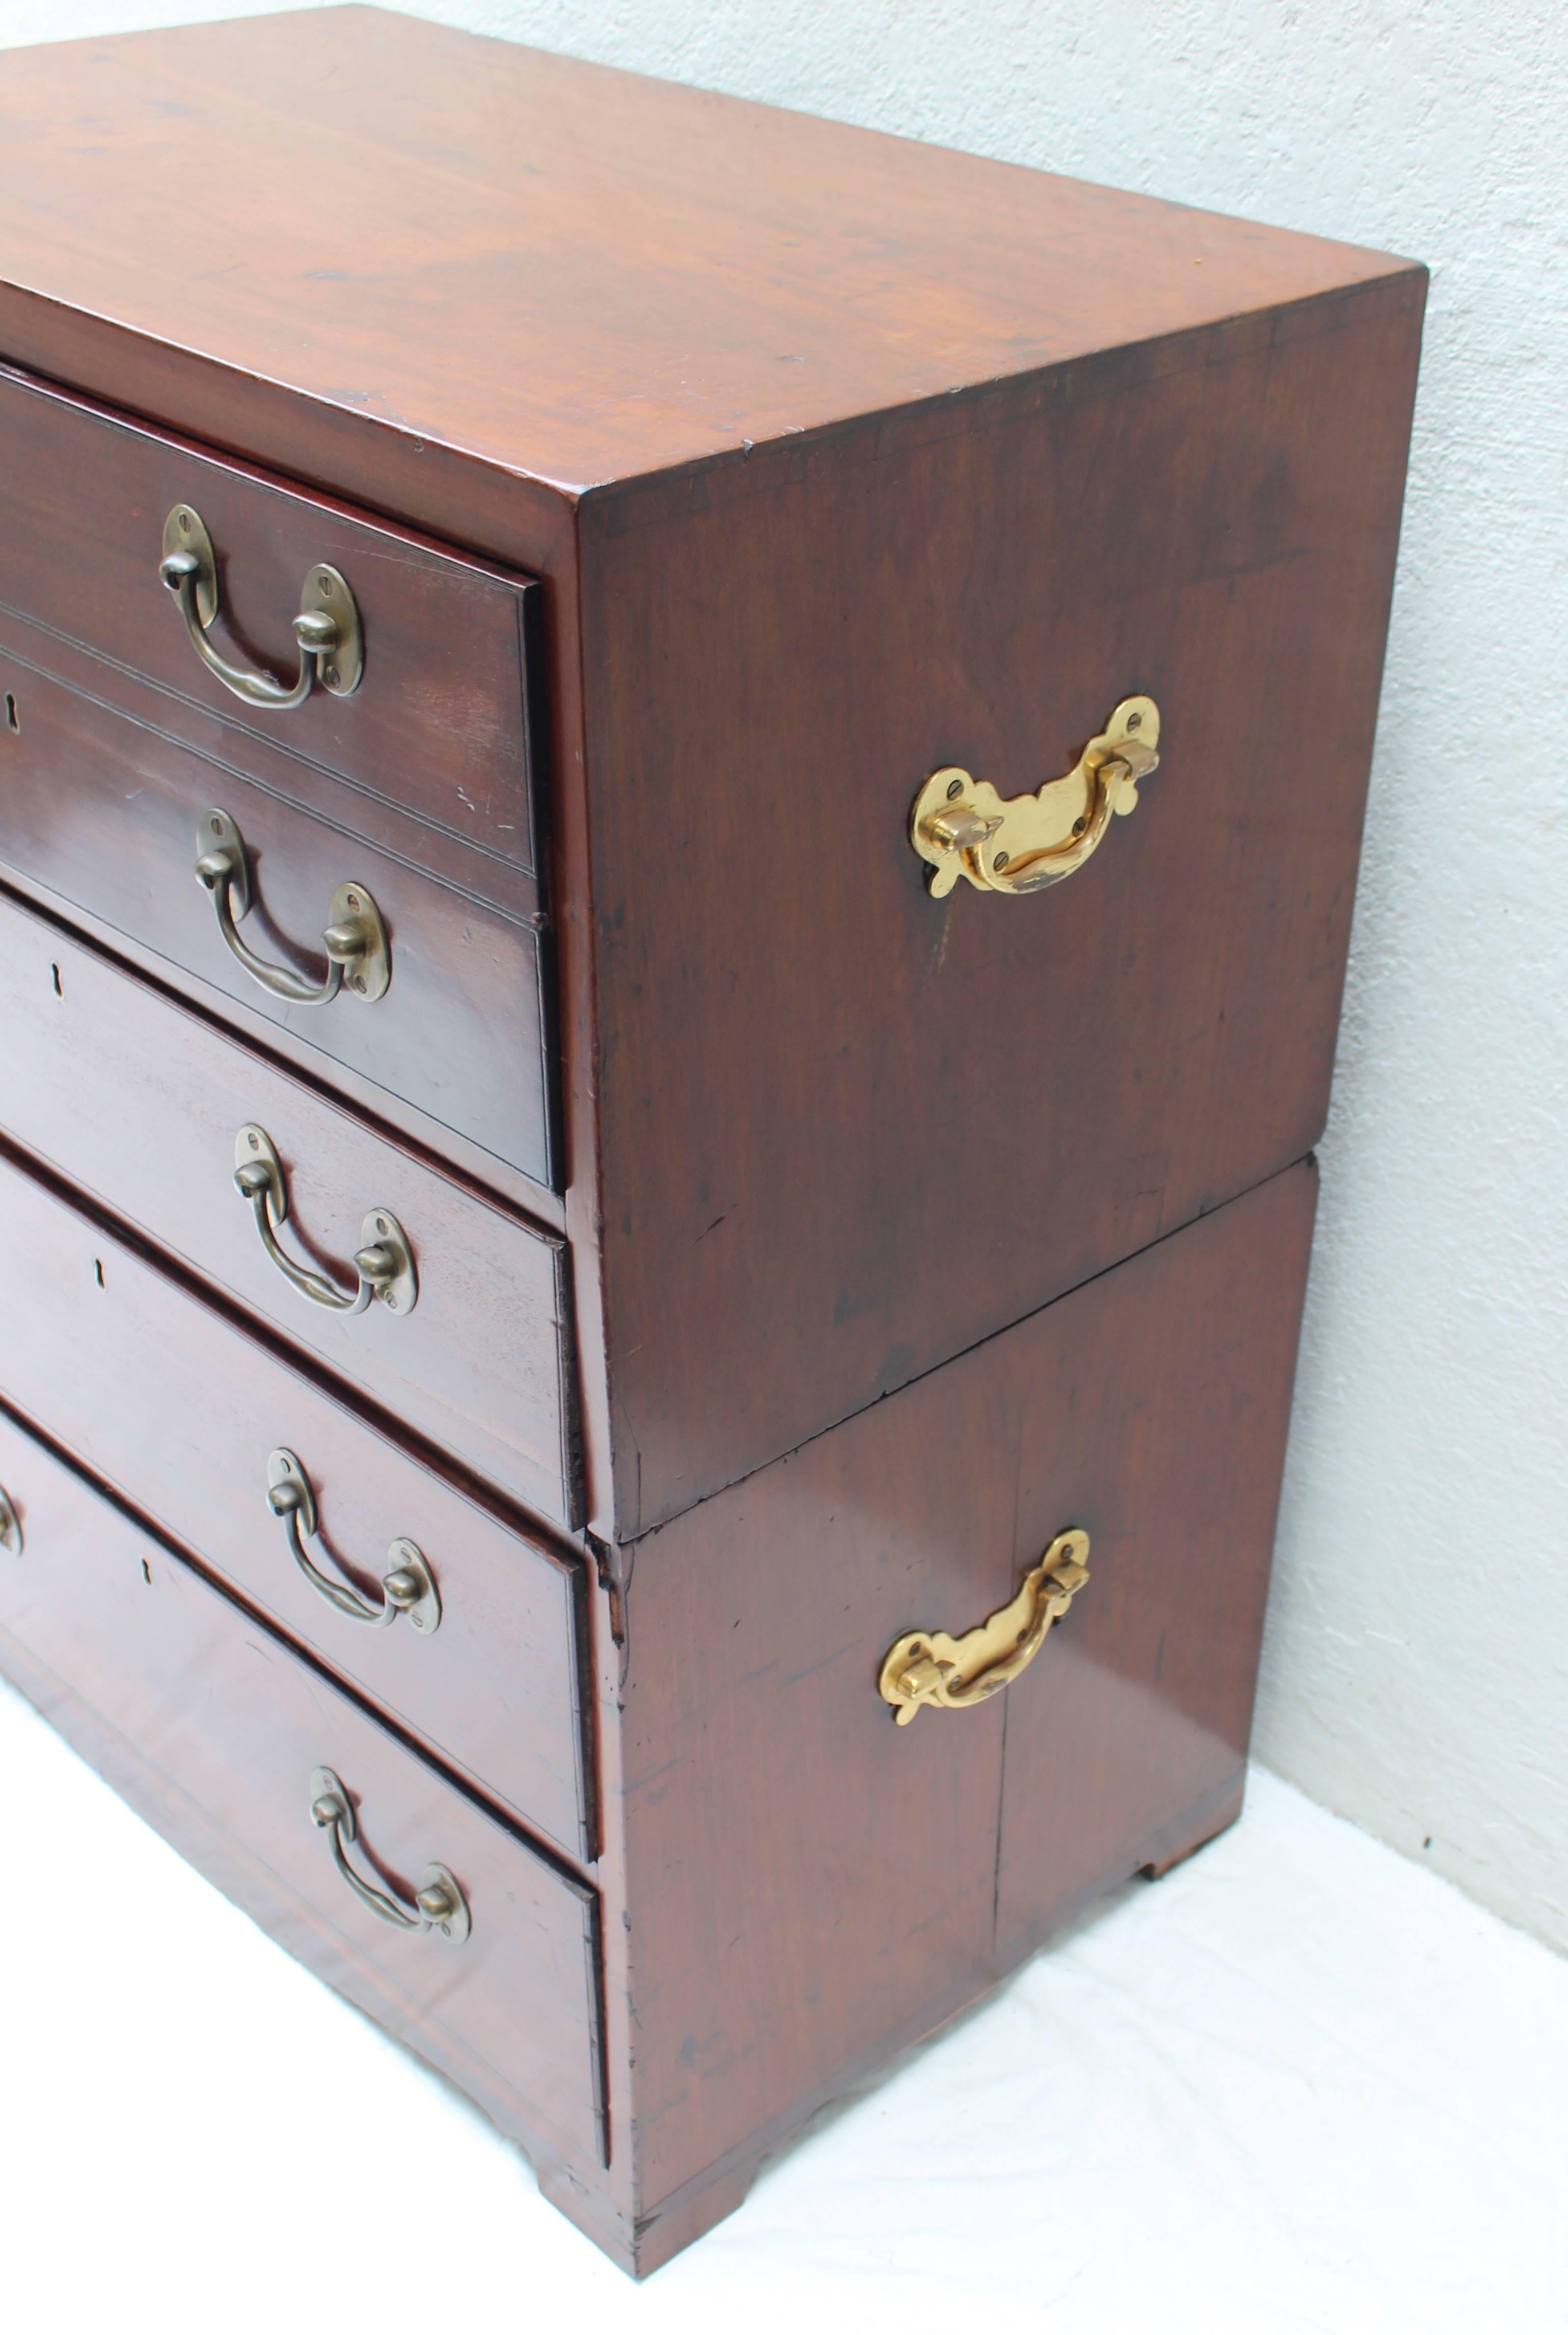 19th Century English Campaign Chest with Desk In Good Condition For Sale In East Hampton, NY